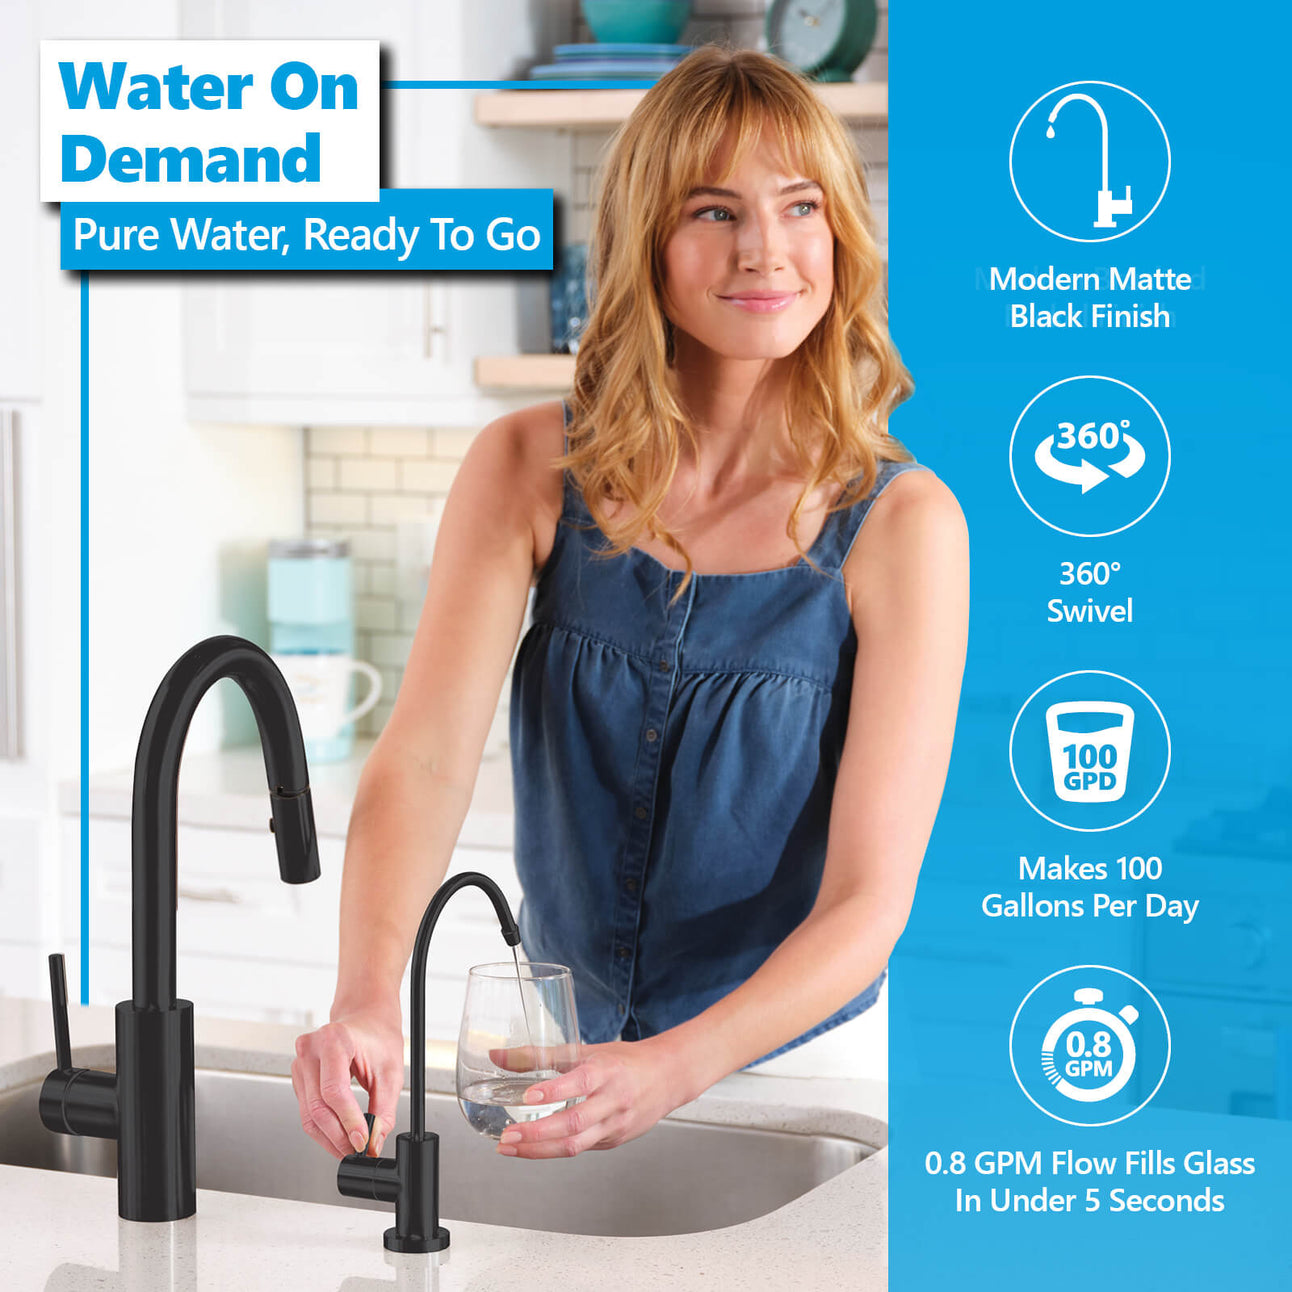 Alkaline RO System with modern matte black faucet